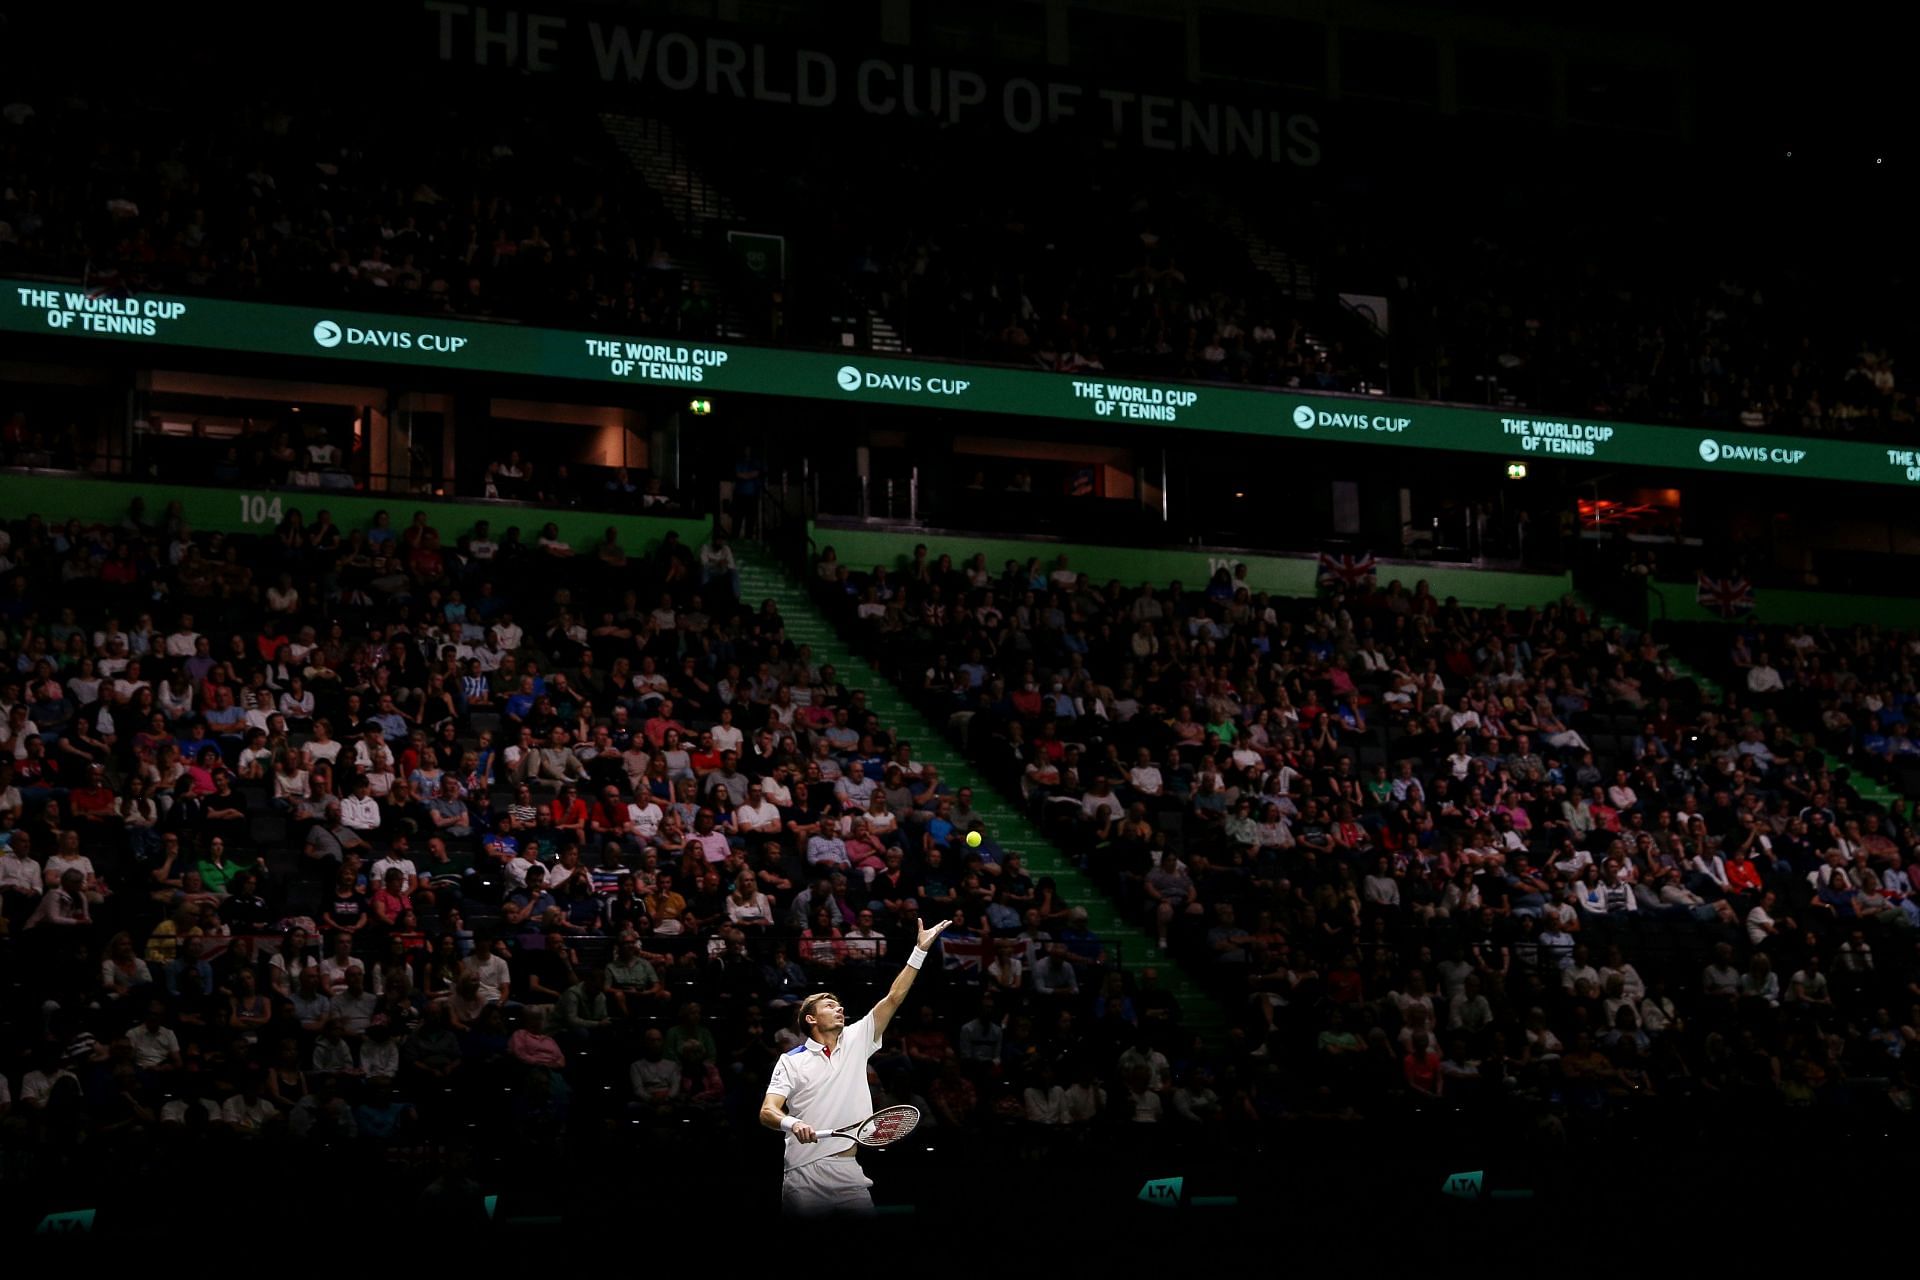 Nicolas Mahut in action at the AO Arena in Manchester, England.